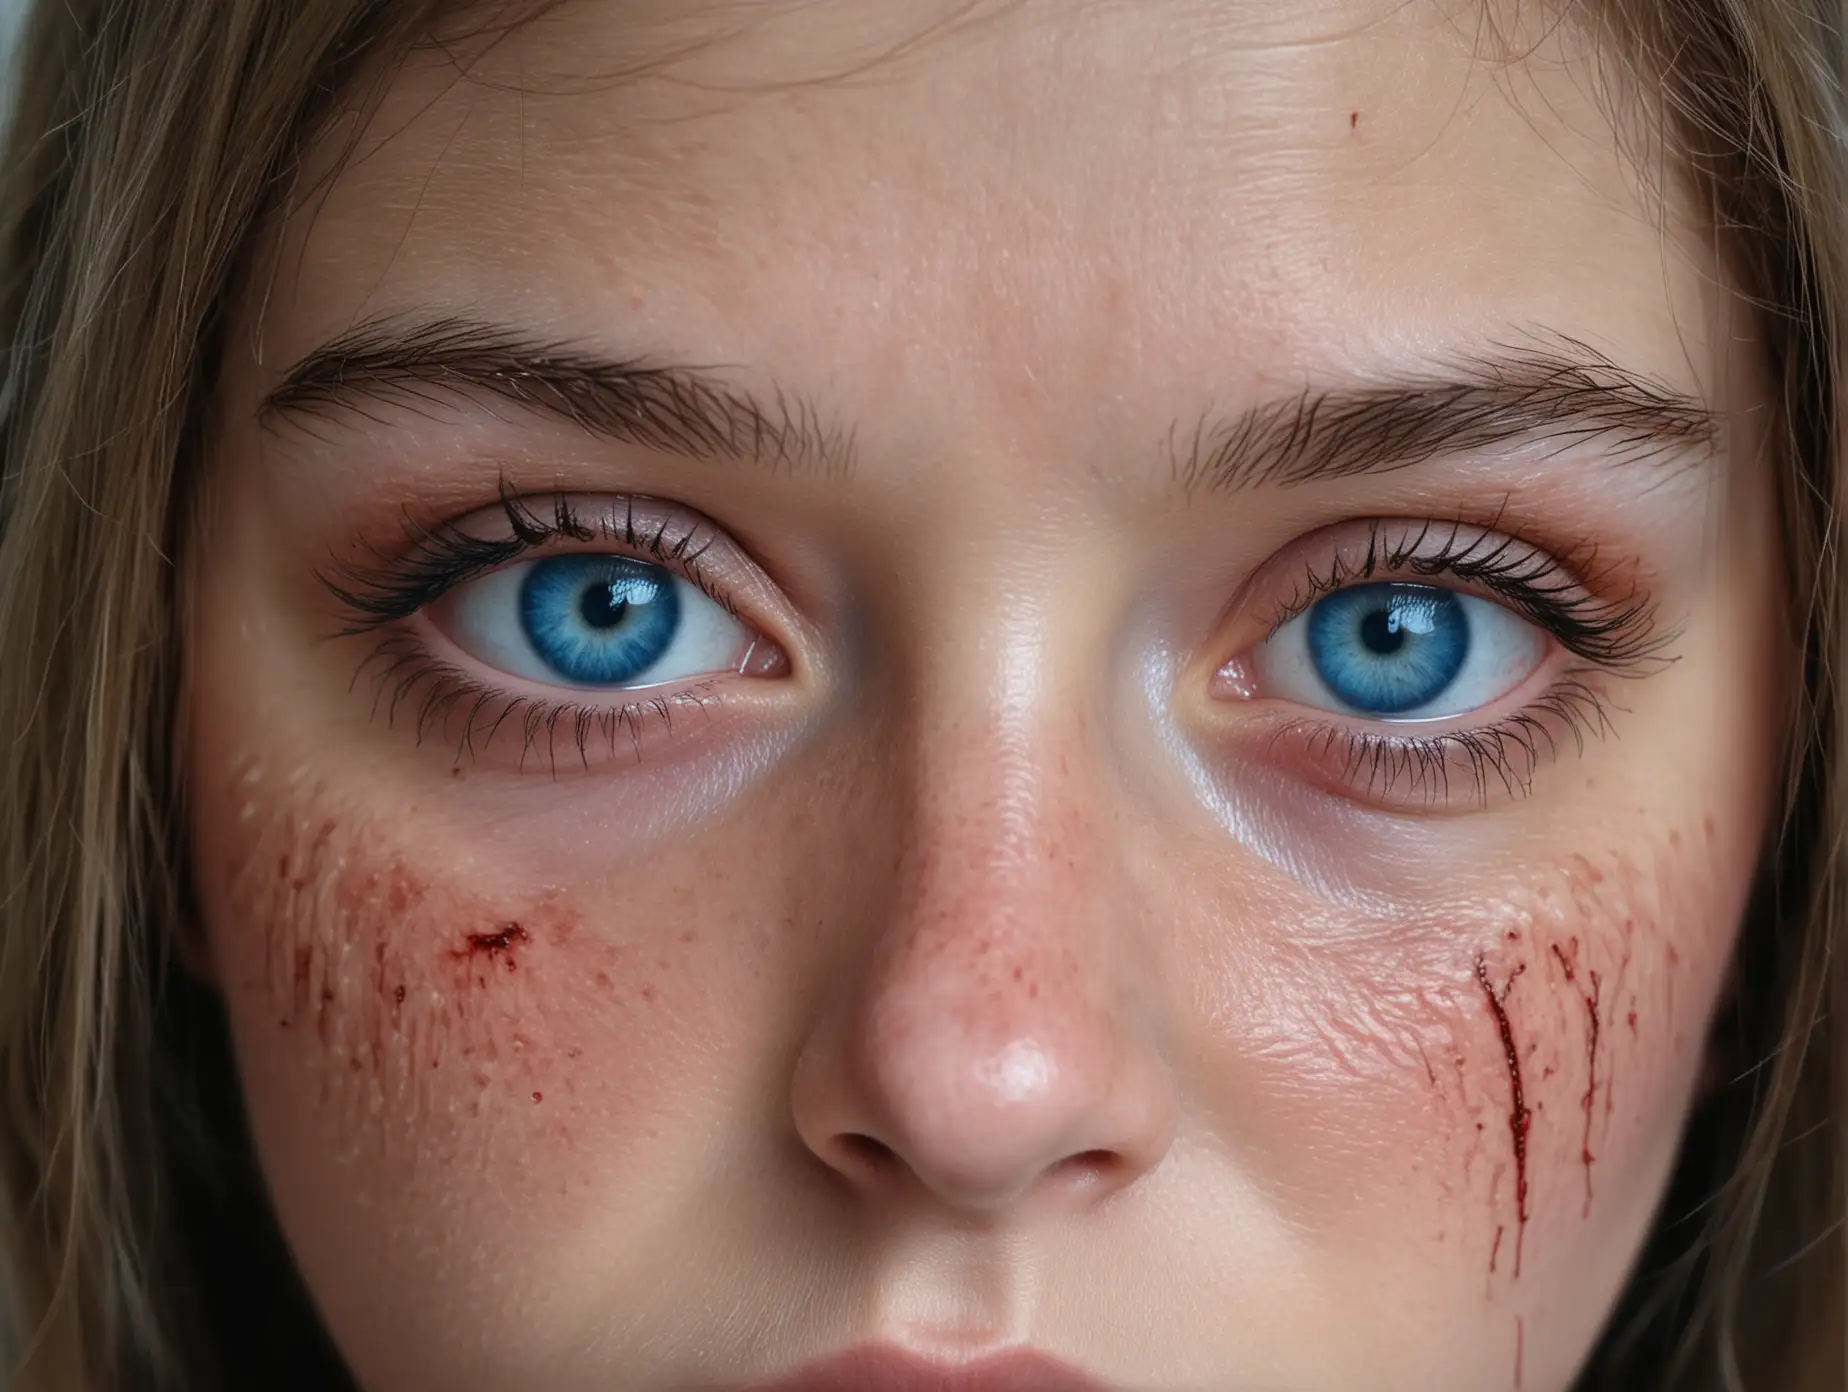 Closeup-Portrait-of-a-Girls-Tense-Blue-Eyes-with-Traces-of-Blood